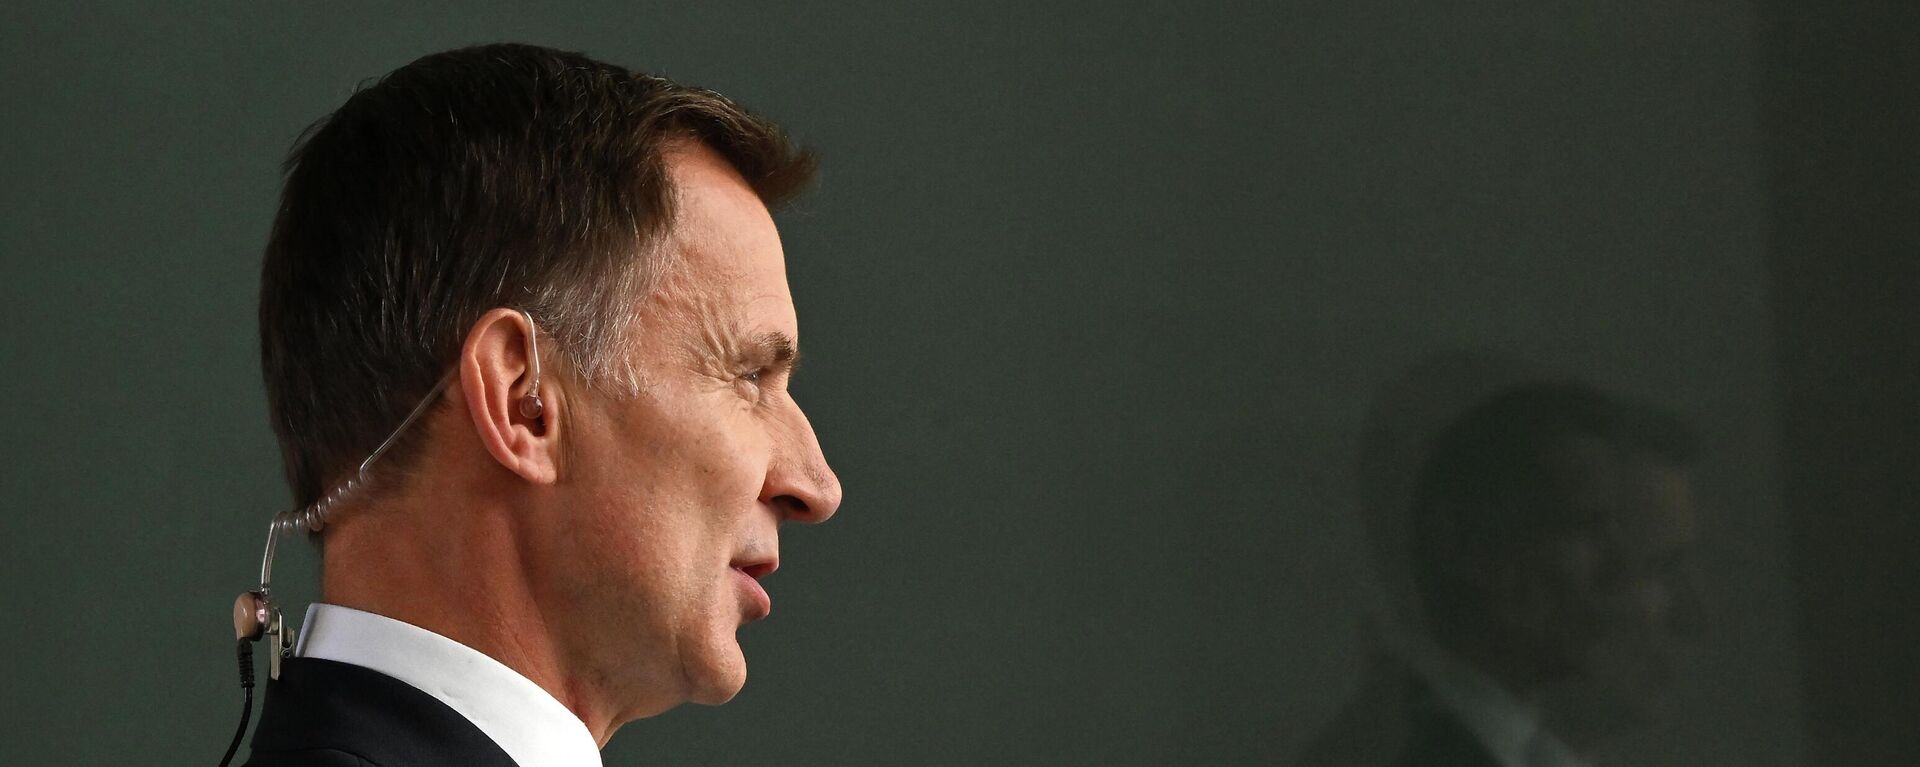 Conservative politician Jeremy Hunt gives an interview outside the BBC studios in central London on July 10, 2022, after appearing on the BBC's 'Sunday Morning' political television show with journalist Sophie Raworth.  - Sputnik International, 1920, 17.10.2022